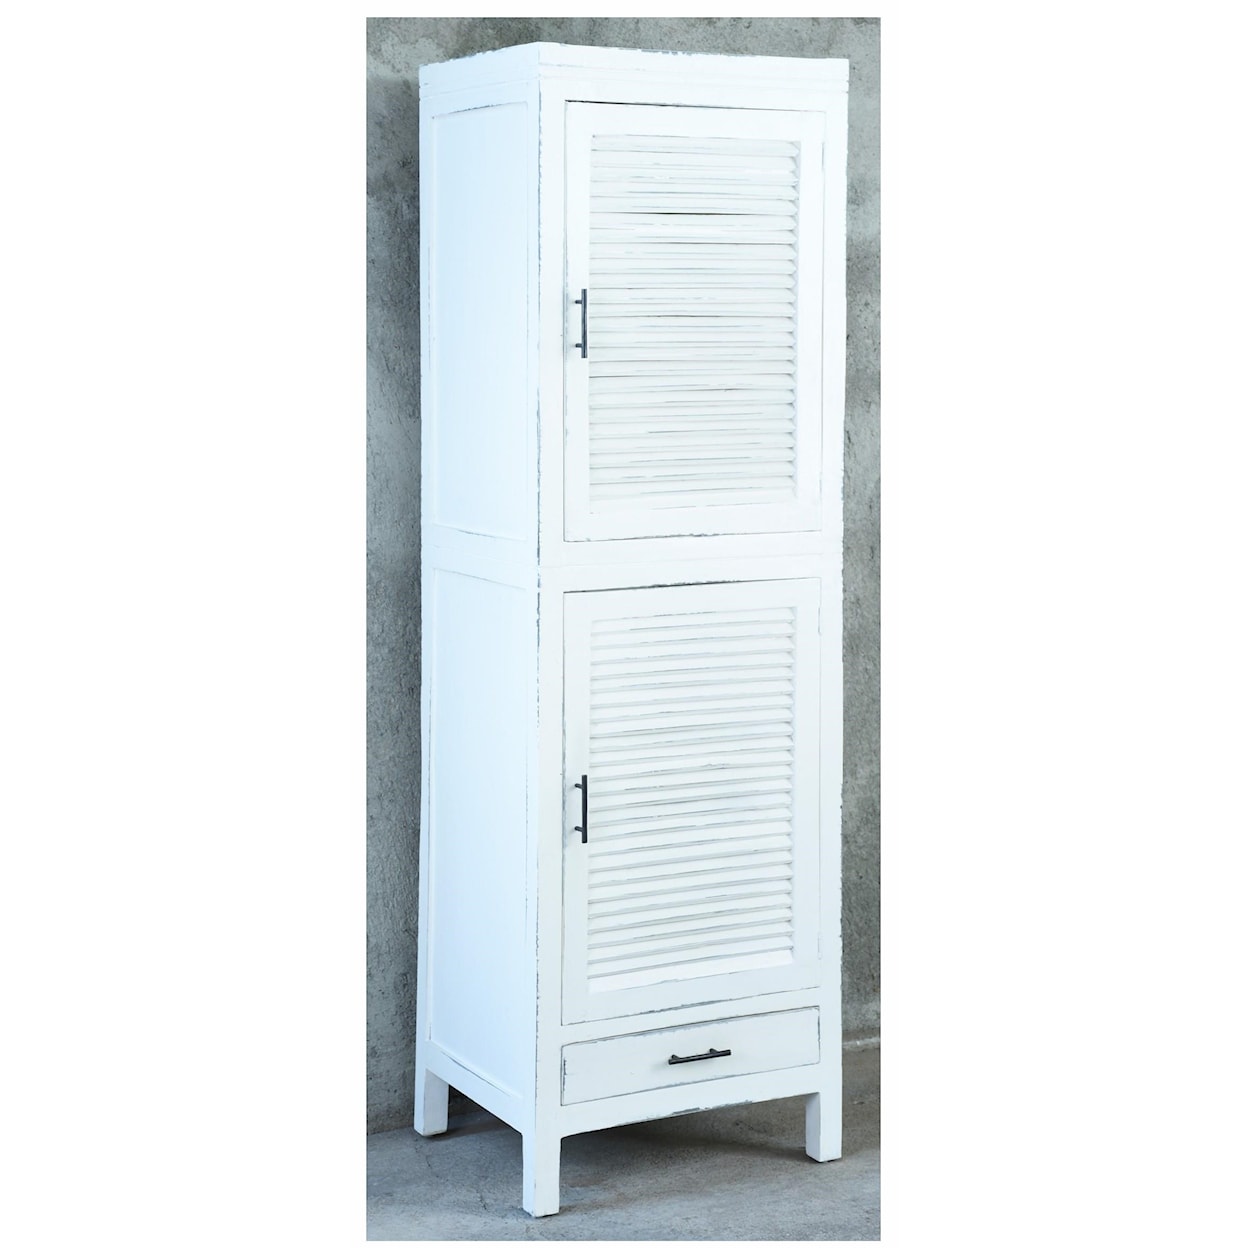 Pacific Paladin Imports ARMOIRE Shutter Armoire